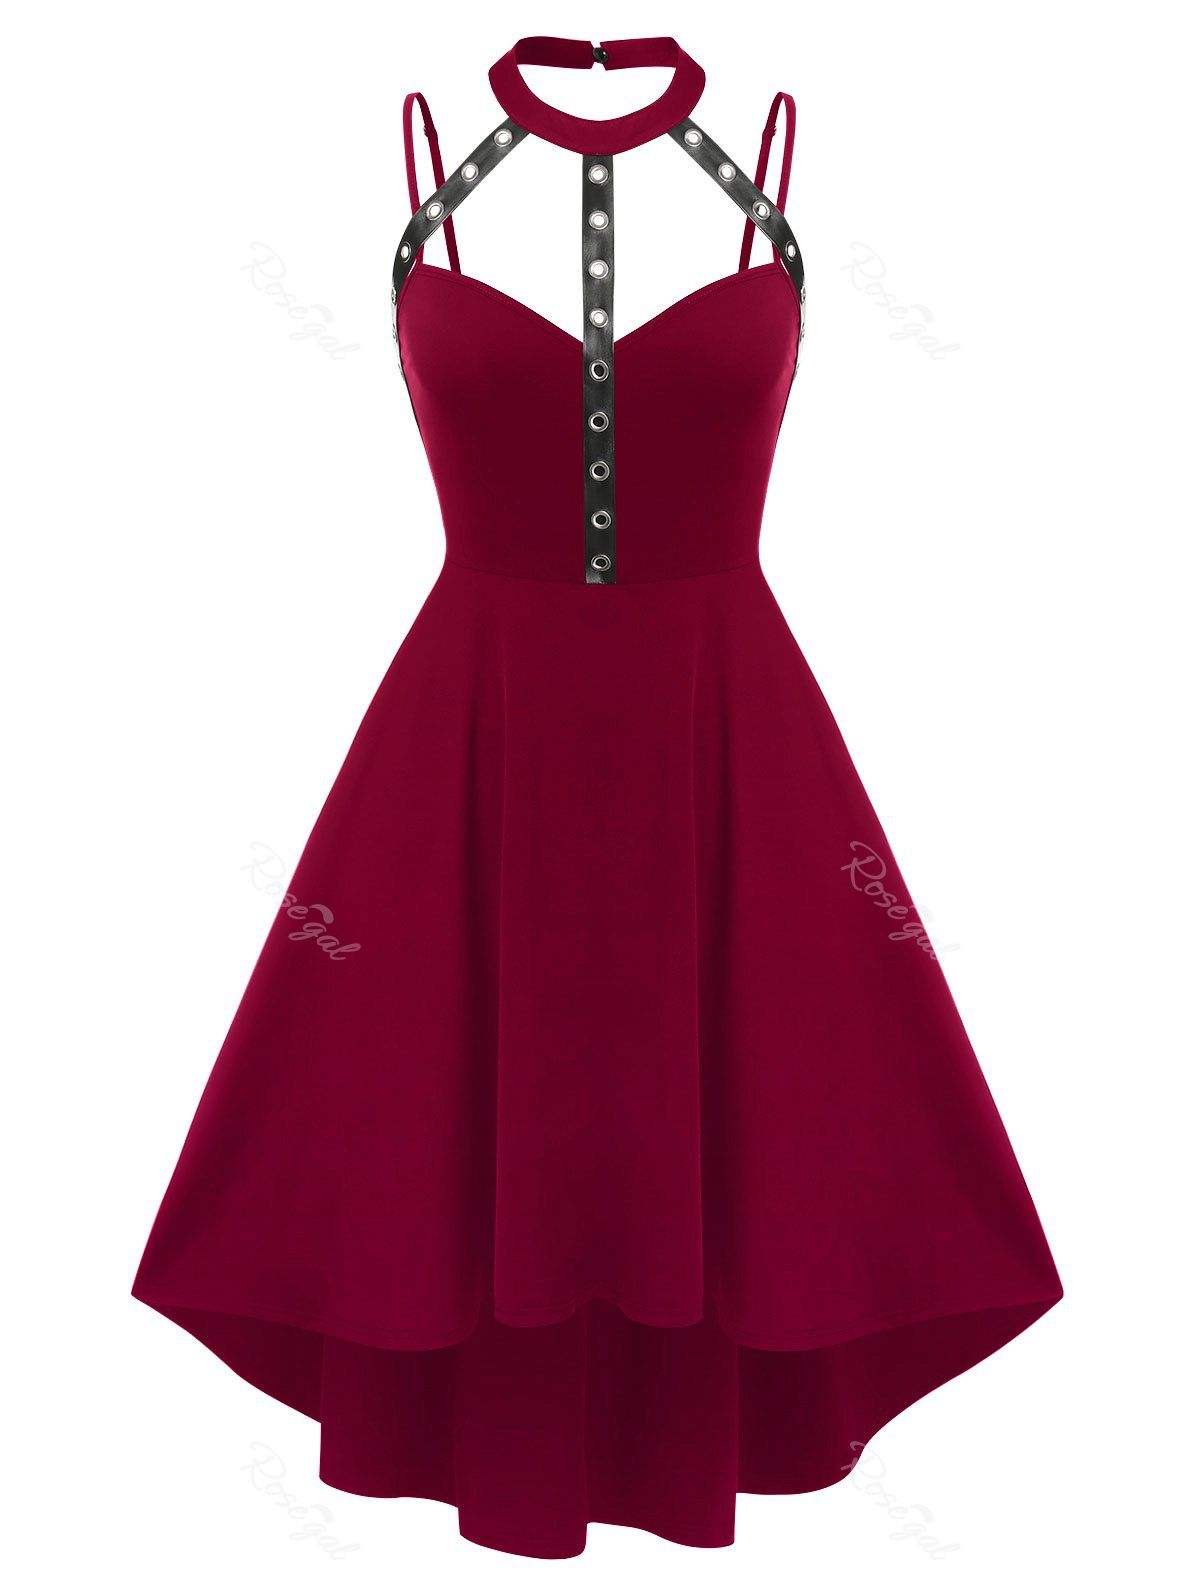 Trendy Plus Size Harness Cutout High Low Gothic Dress  